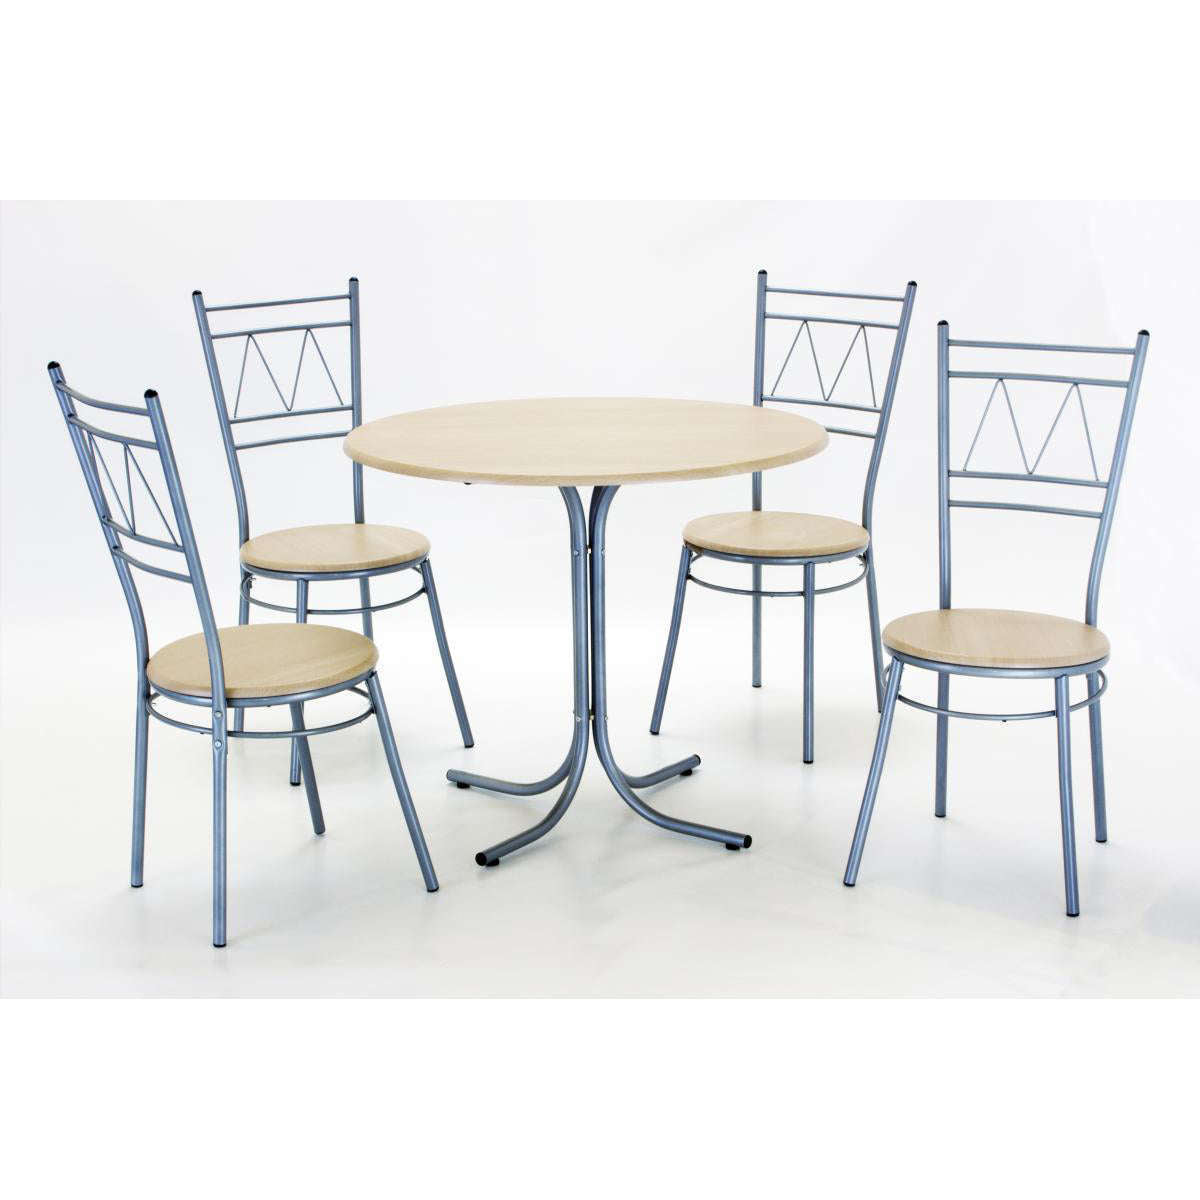 Ashpinoke:Oslo Round Dining Set with 4 Chairs Silver & Beech,Dining Sets,Heartlands Furniture